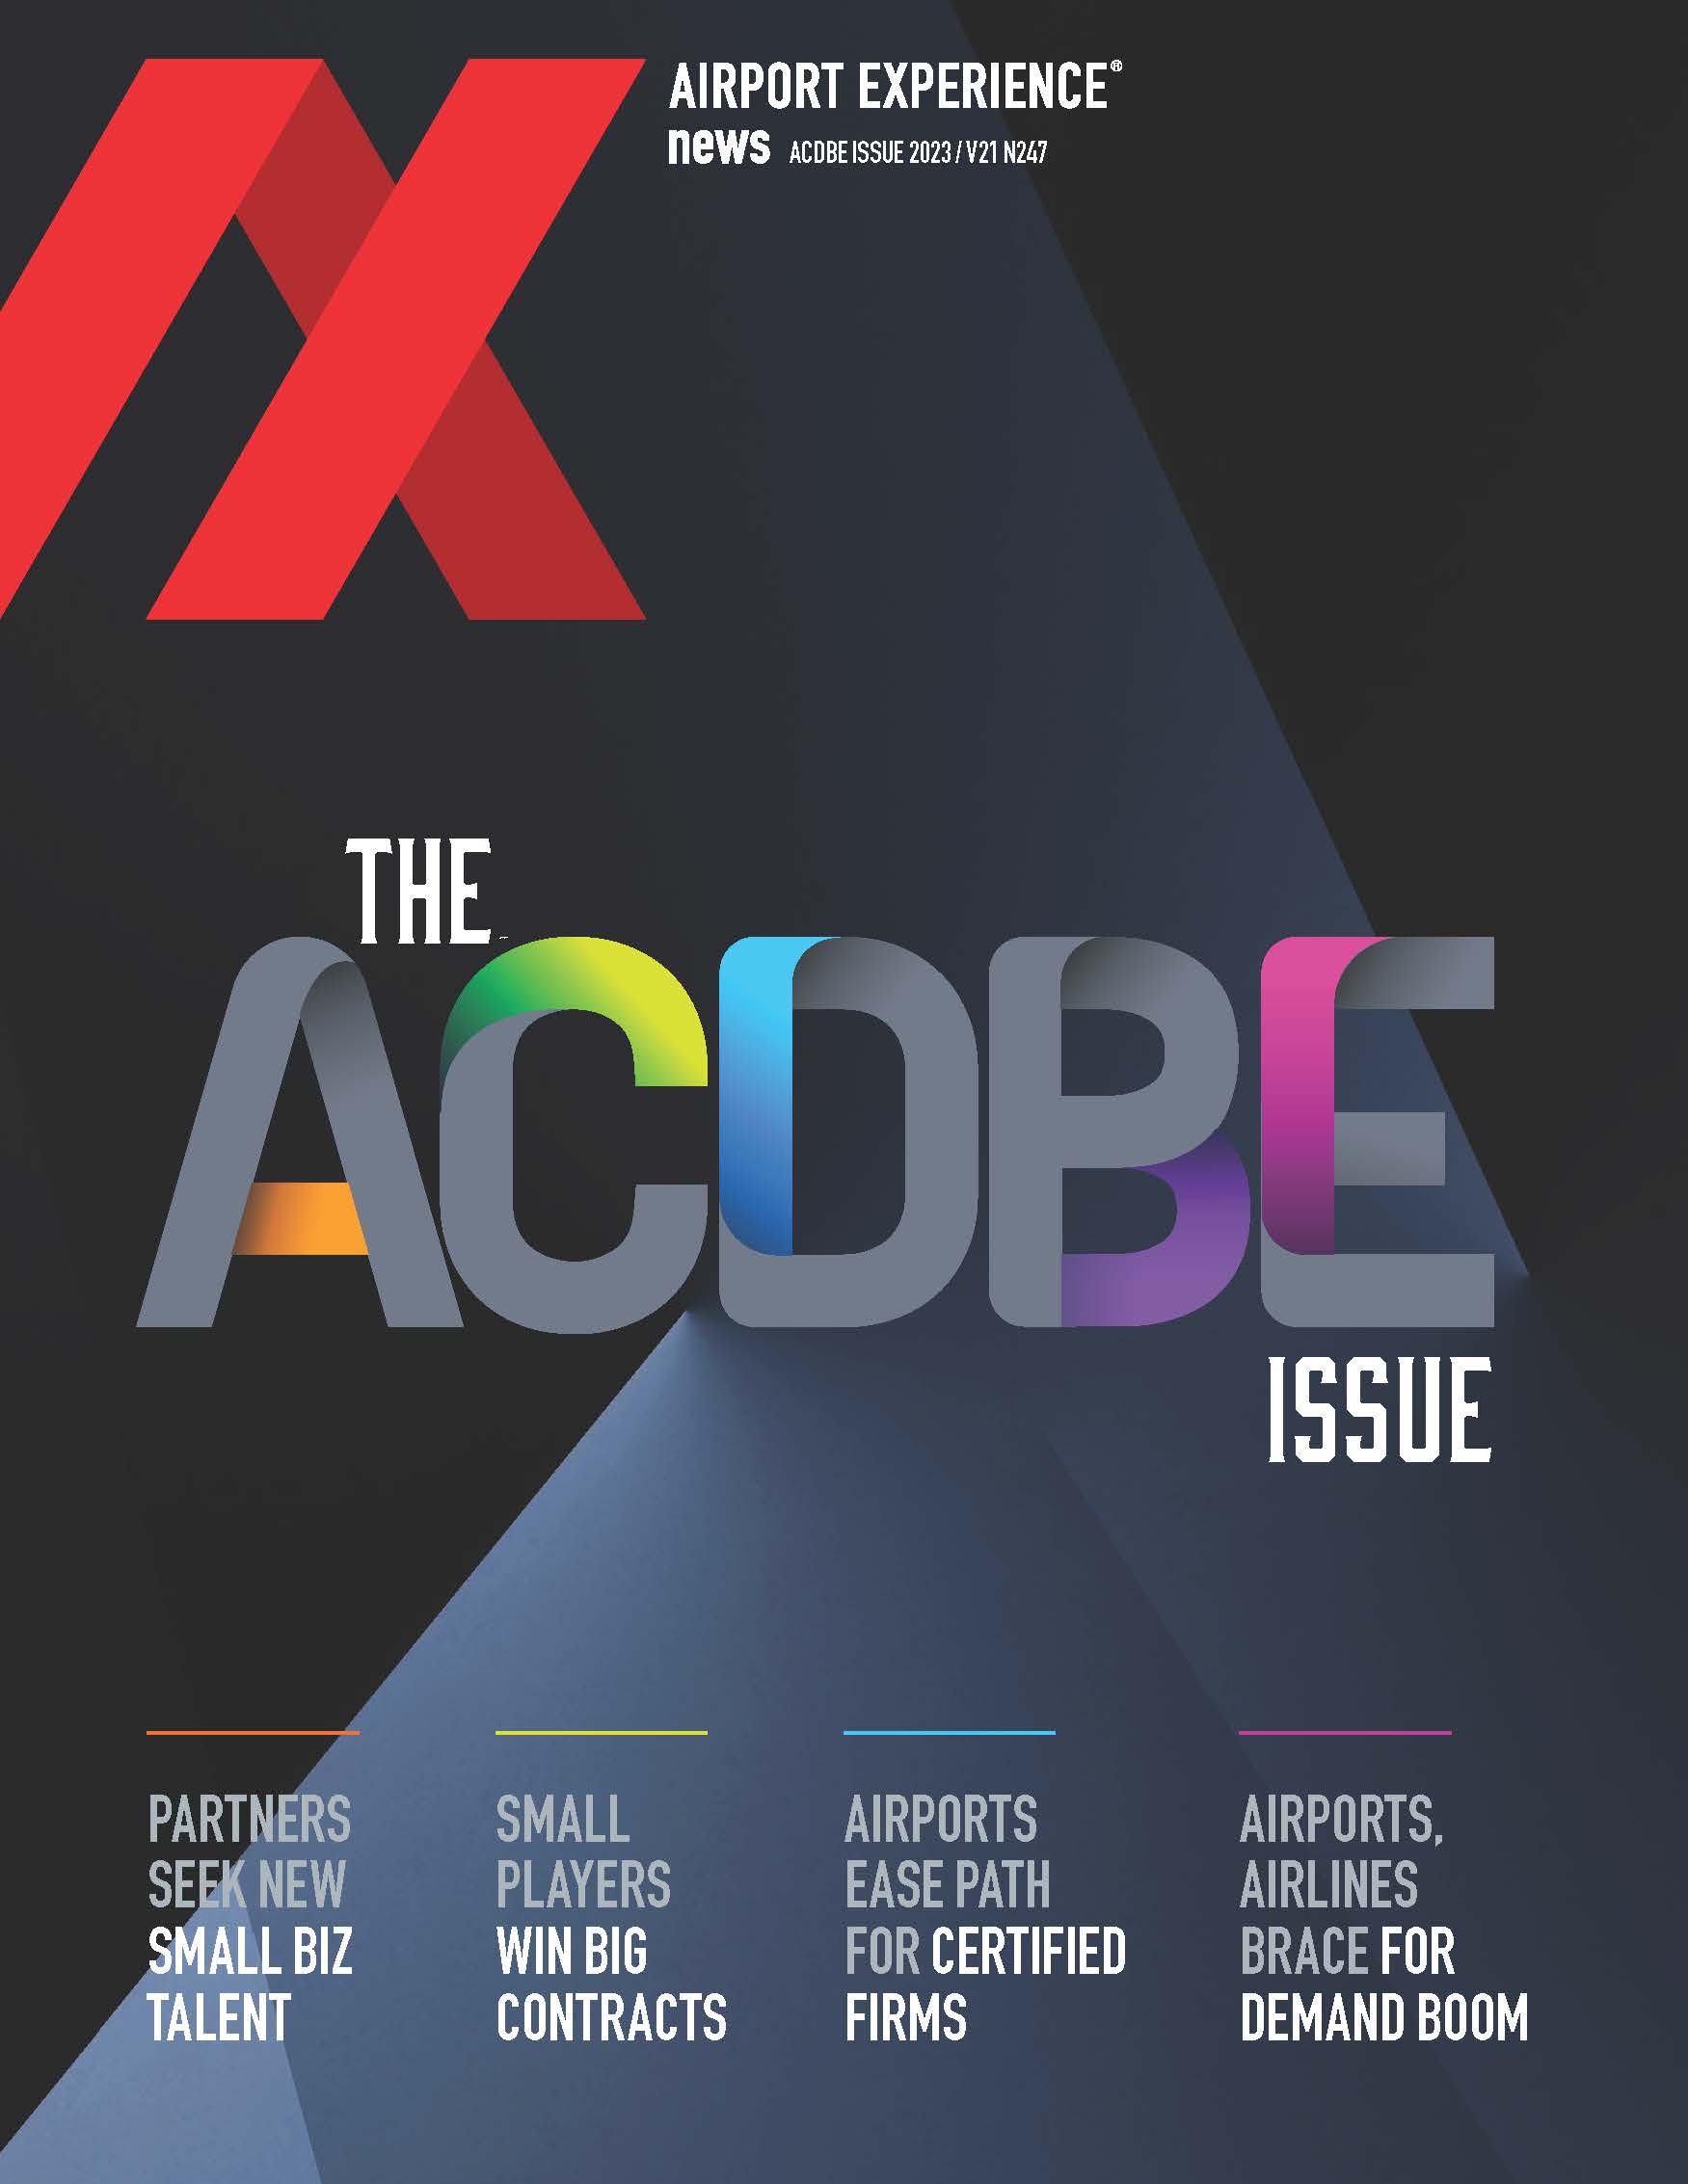 Airport Experience News Magazine | ACDBE/Diversity Issue 2023